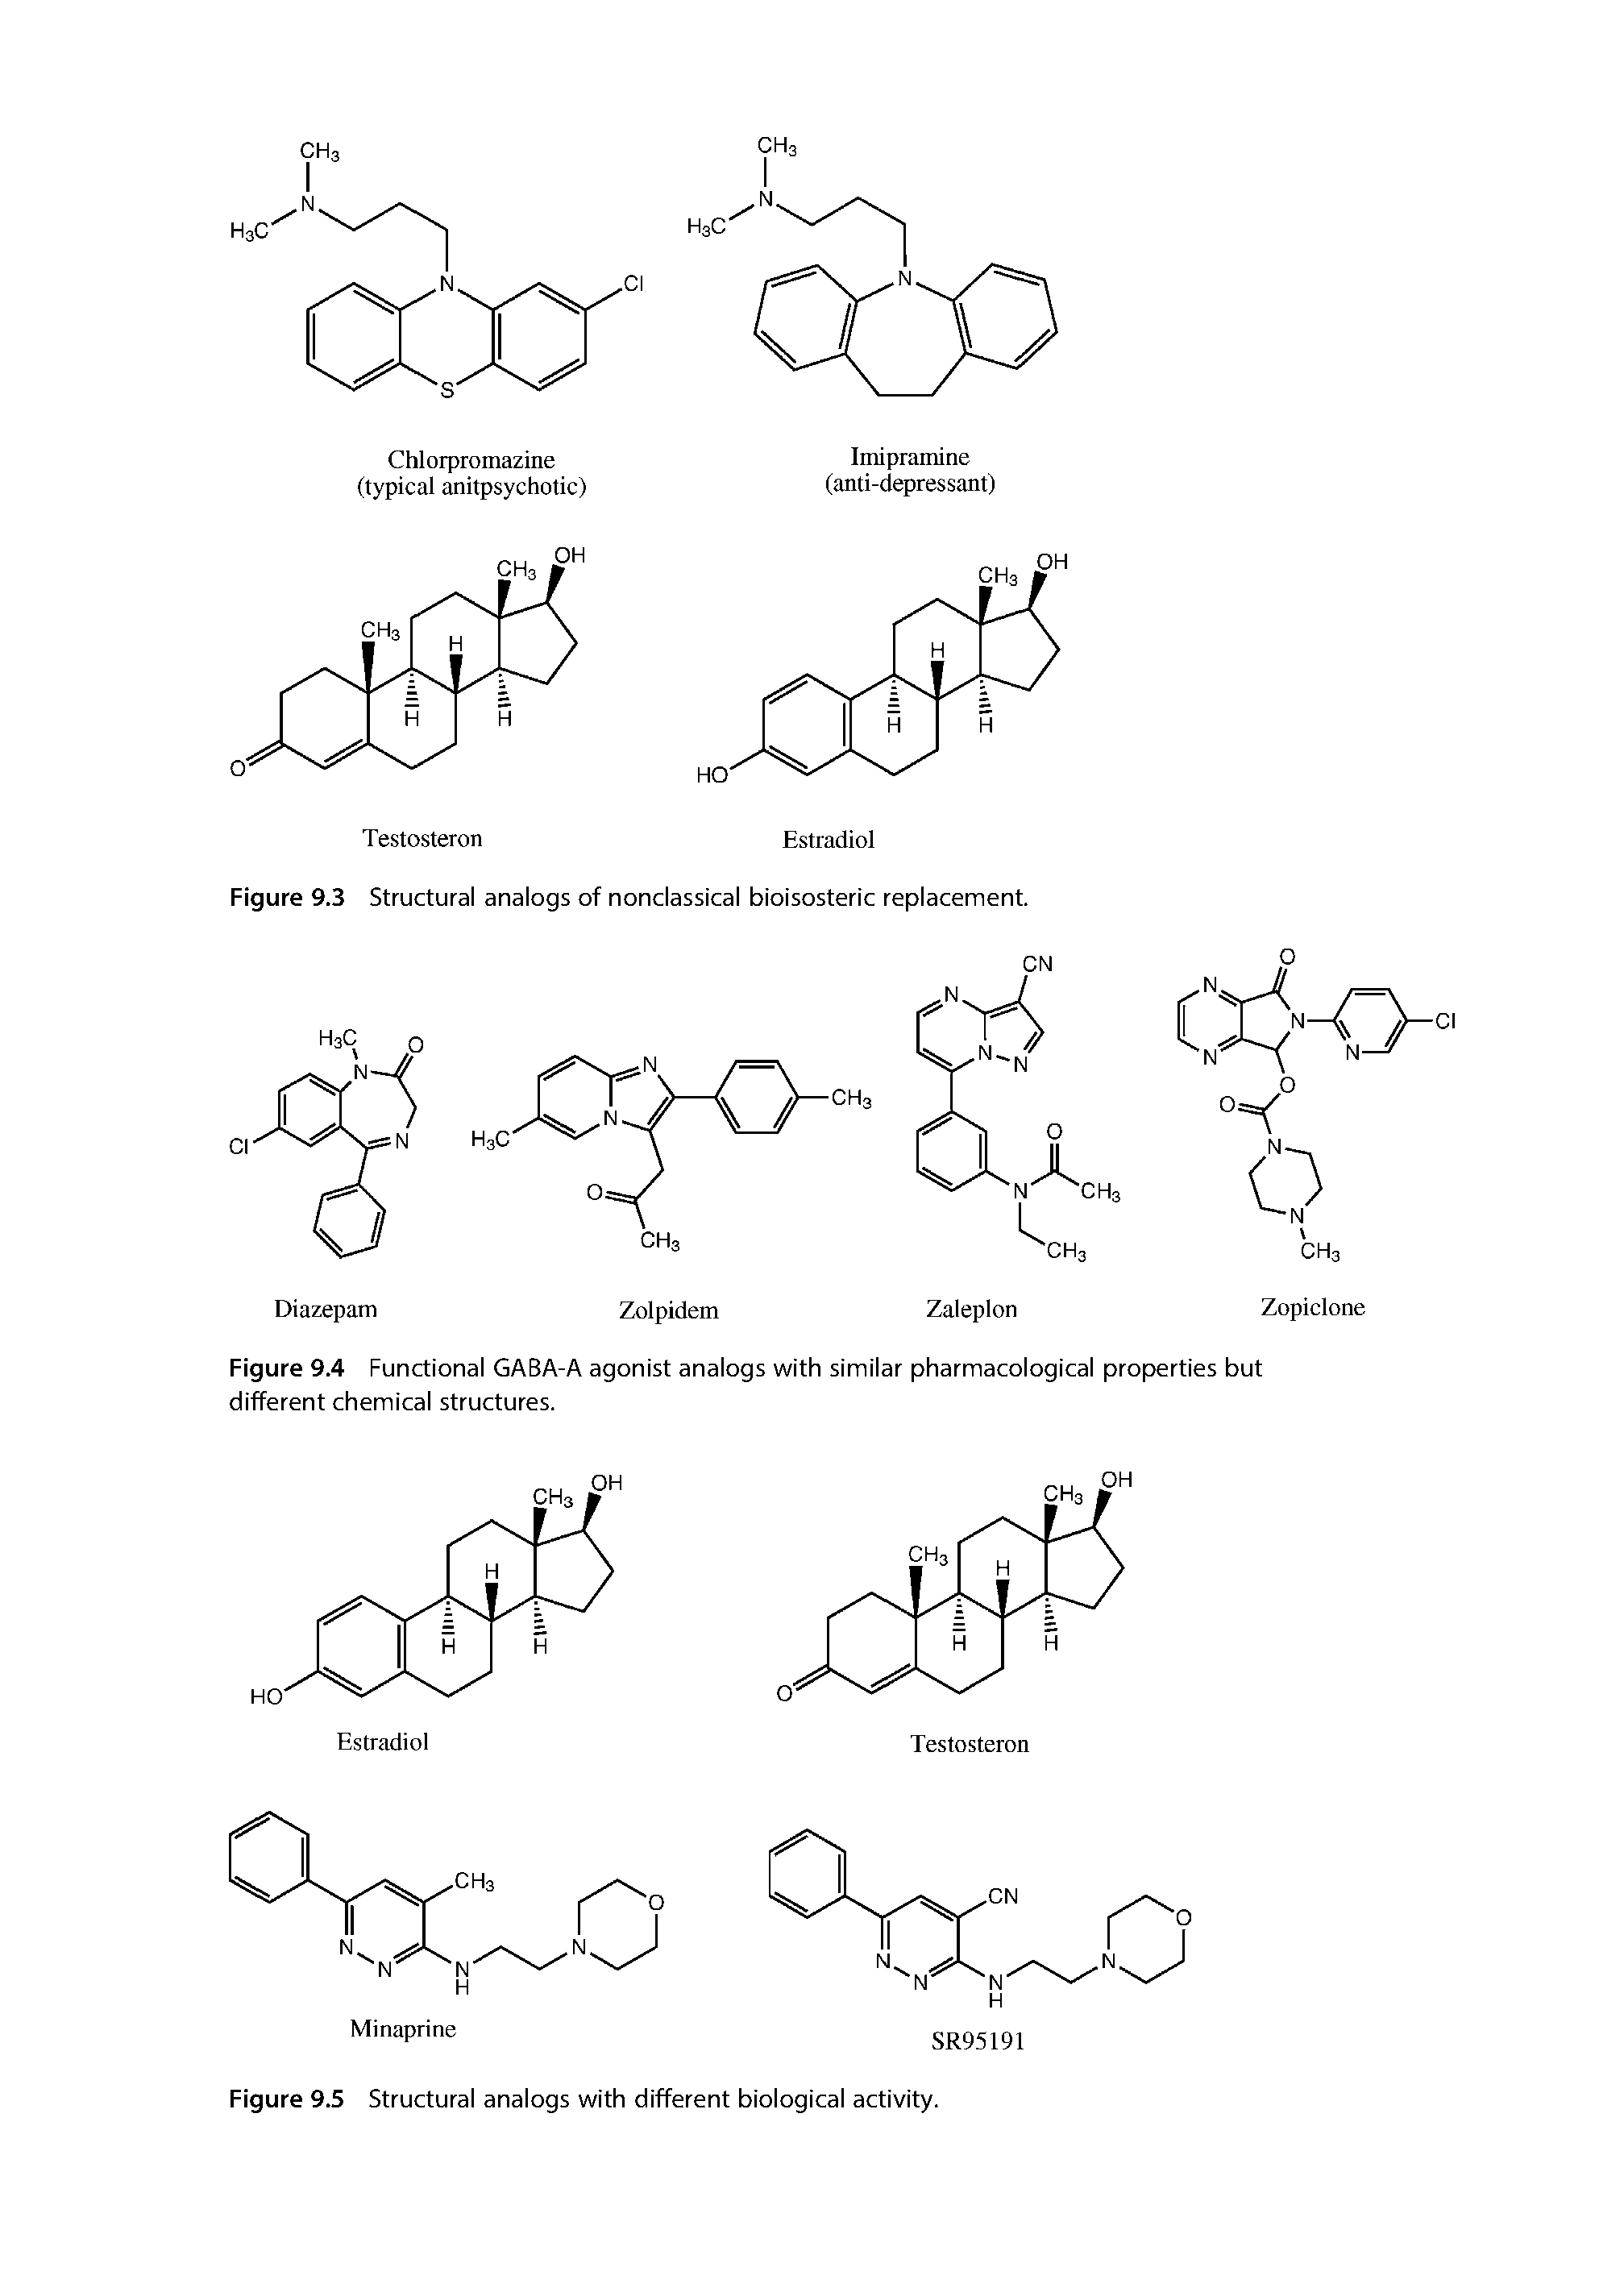 Figure 9.5 Structural analogs with different biological activity.